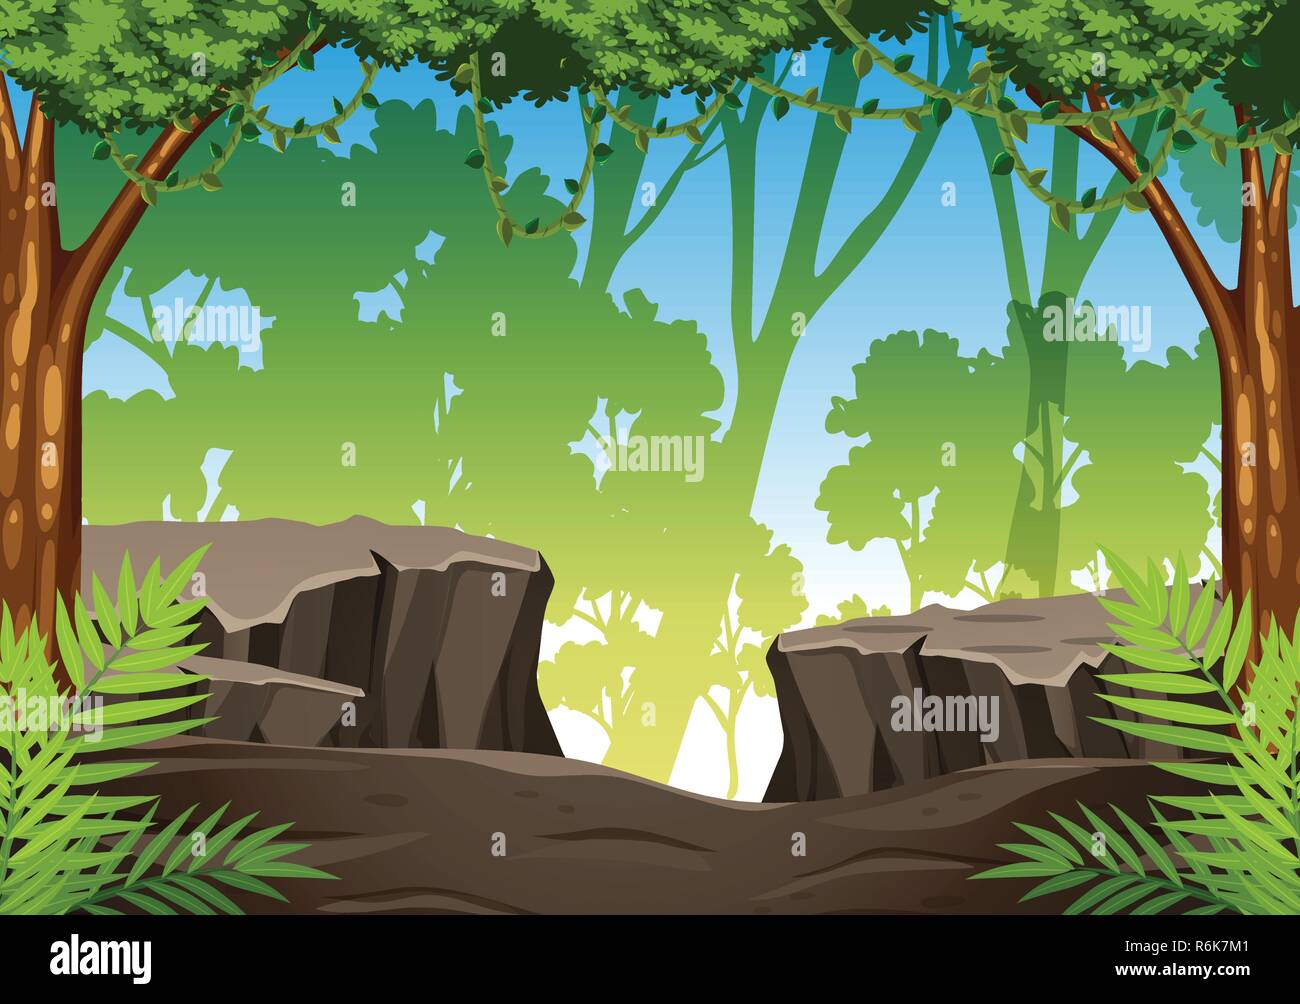 Clipart jungle background Stock Vector Images - Alamy